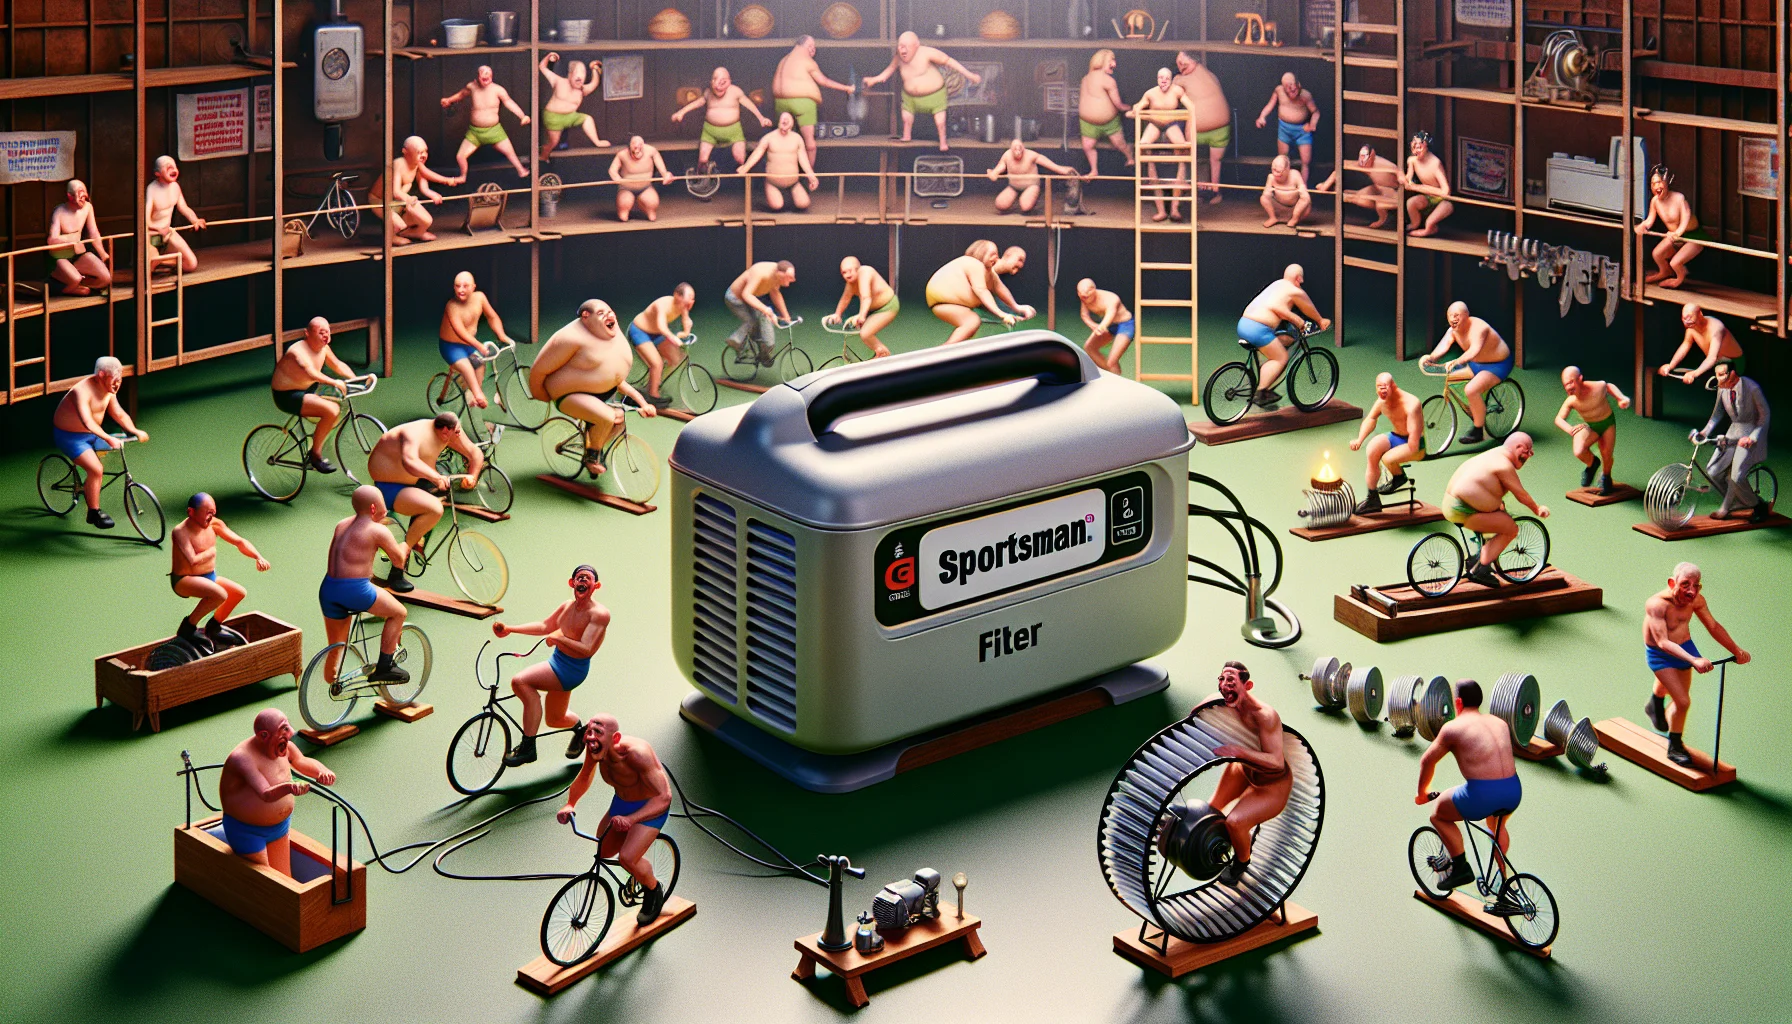 Create a humorous and realistic image featuring a Sportsman Generator's filter. The scene depicts a playful scenario where a group of randomly selected individuals from various descents and genders are trying to generate electricity. They’re doing all manner of silly things, like running on hamster wheels, bicycling like crazy, and even turning hand-cranked dynamos, all trying to power a tiny light bulb. The generator filter stands proudly in the center, viewed as the hero of the scene, proving it’s much easier, efficient and reliable for generating electricity. The atmosphere is fun-filled with everyone laughing and enjoying the absurdity.